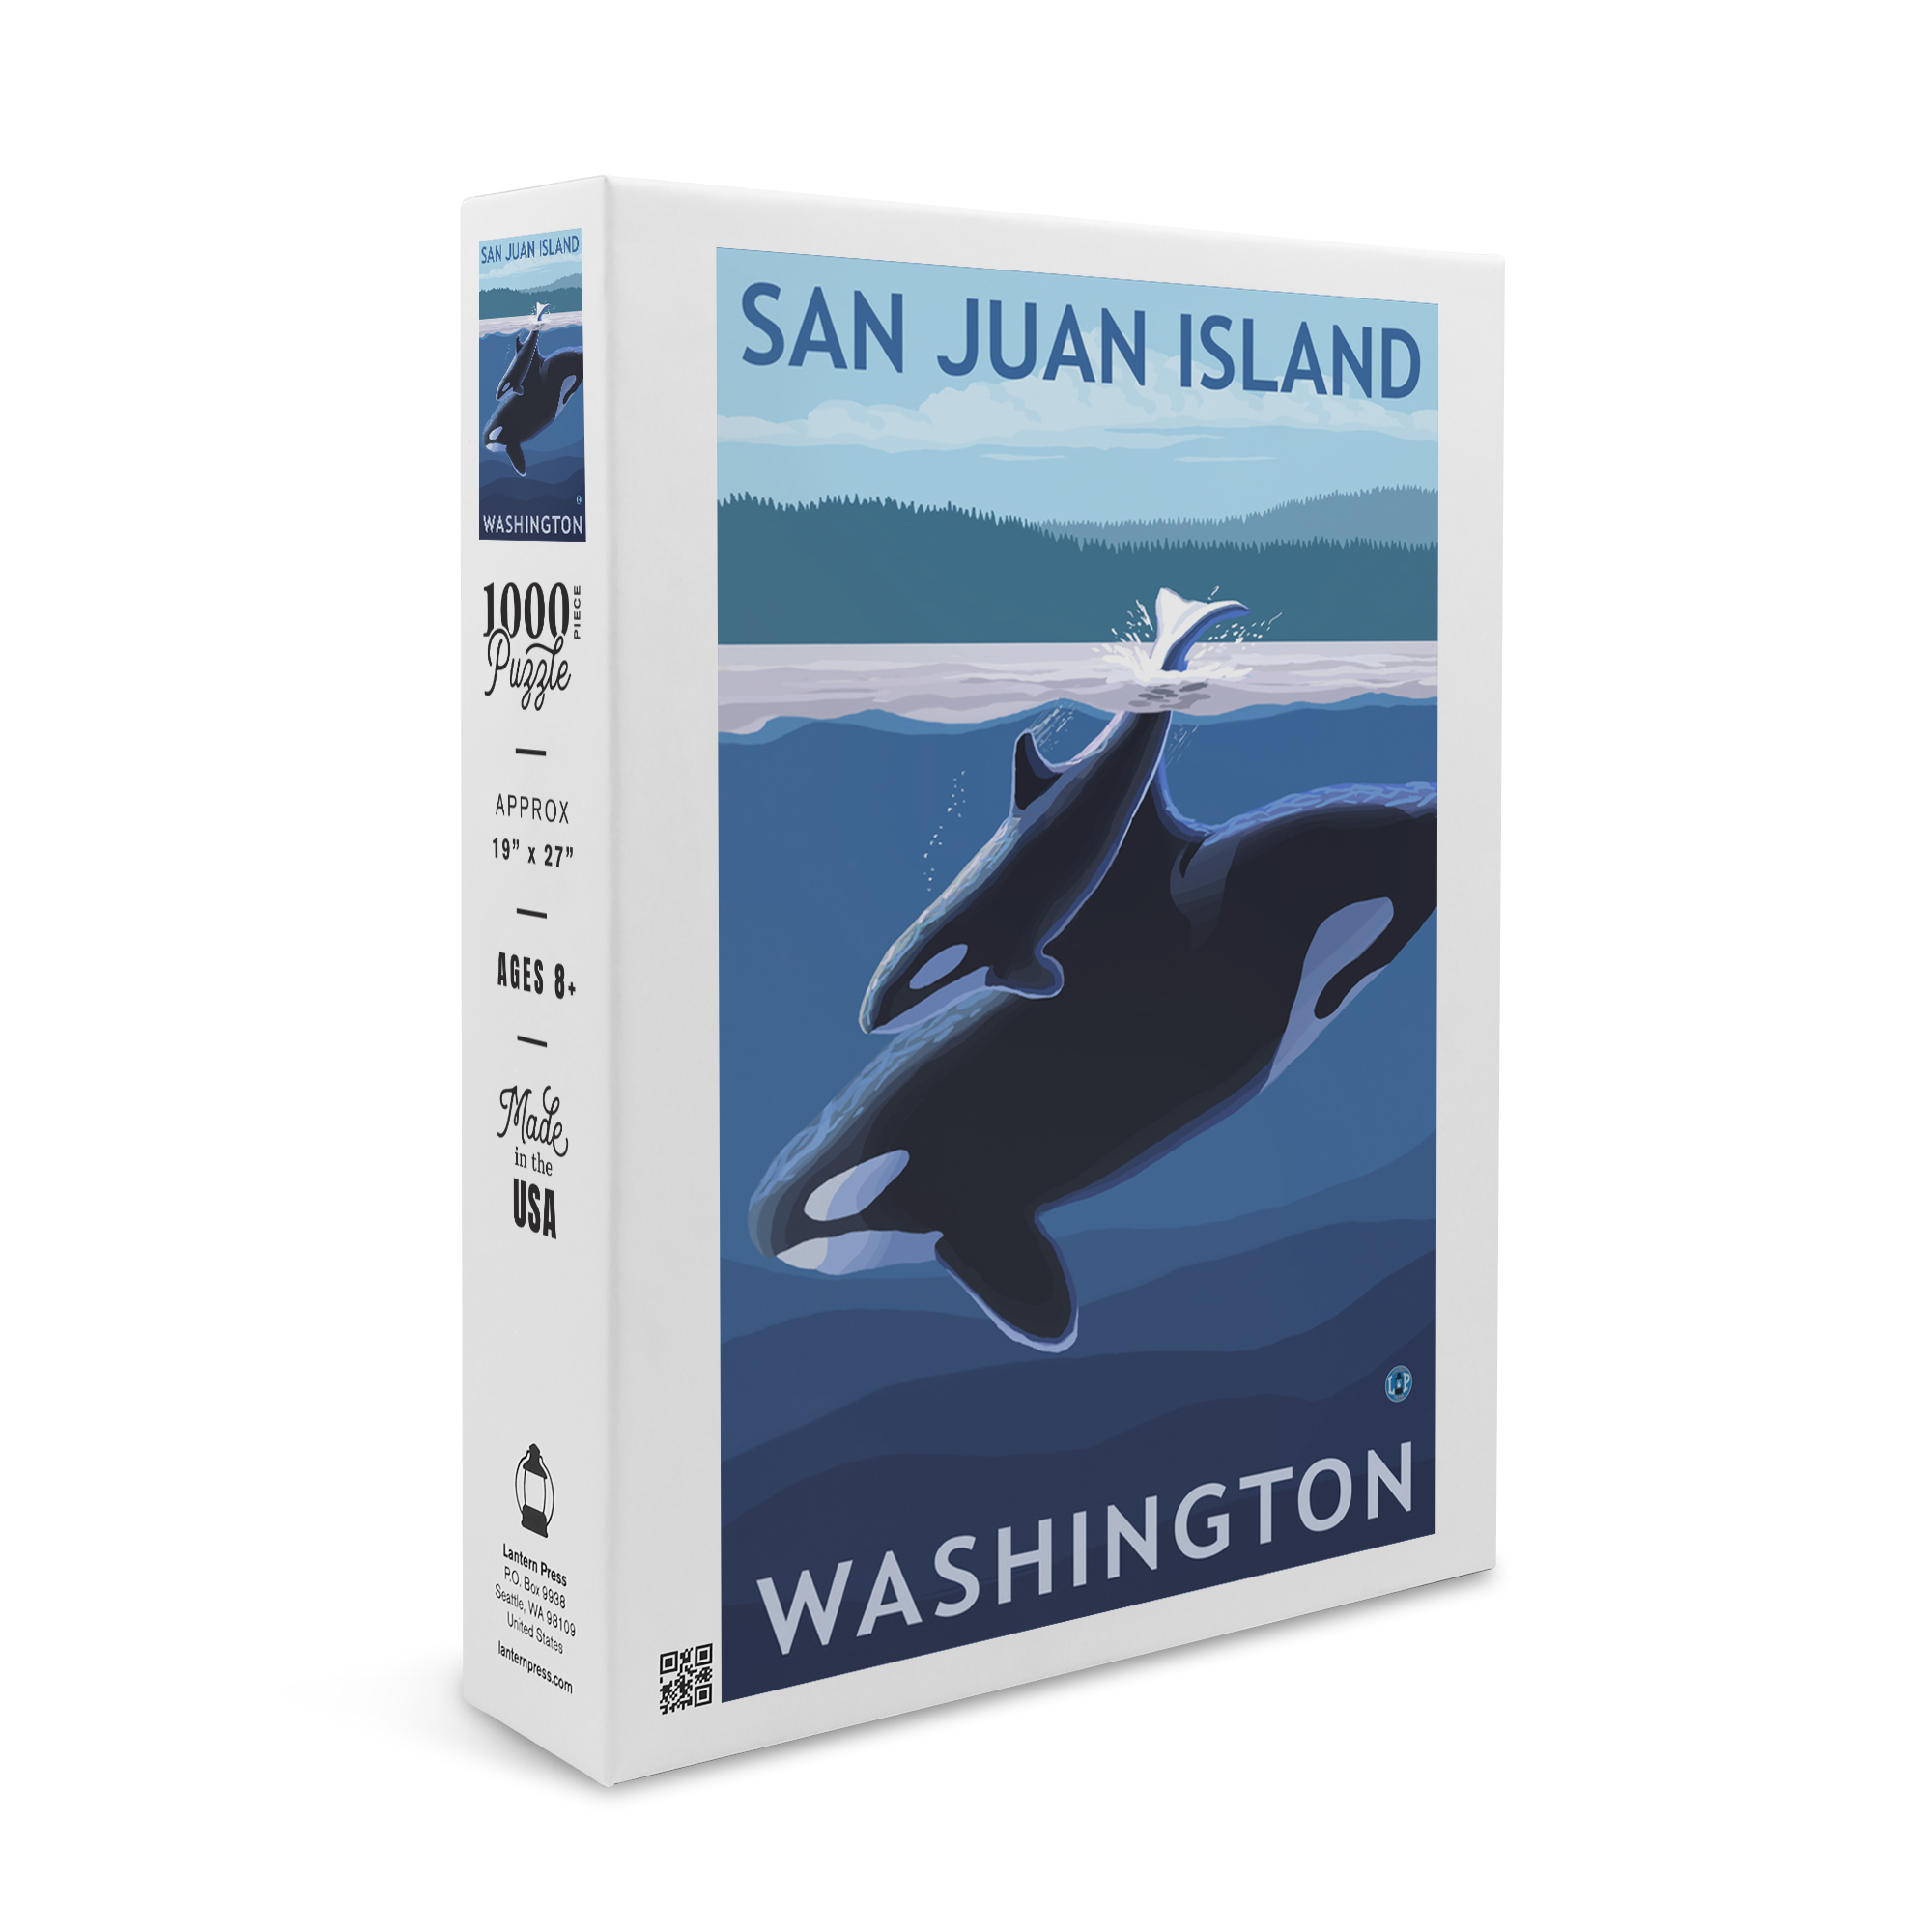 San Juan Island, Washington, Orca and Calf (1000 Piece Puzzle, Size 19x27, Challenging Jigsaw Puzzle for Adults and Family, Made in USA) - image 1 of 4